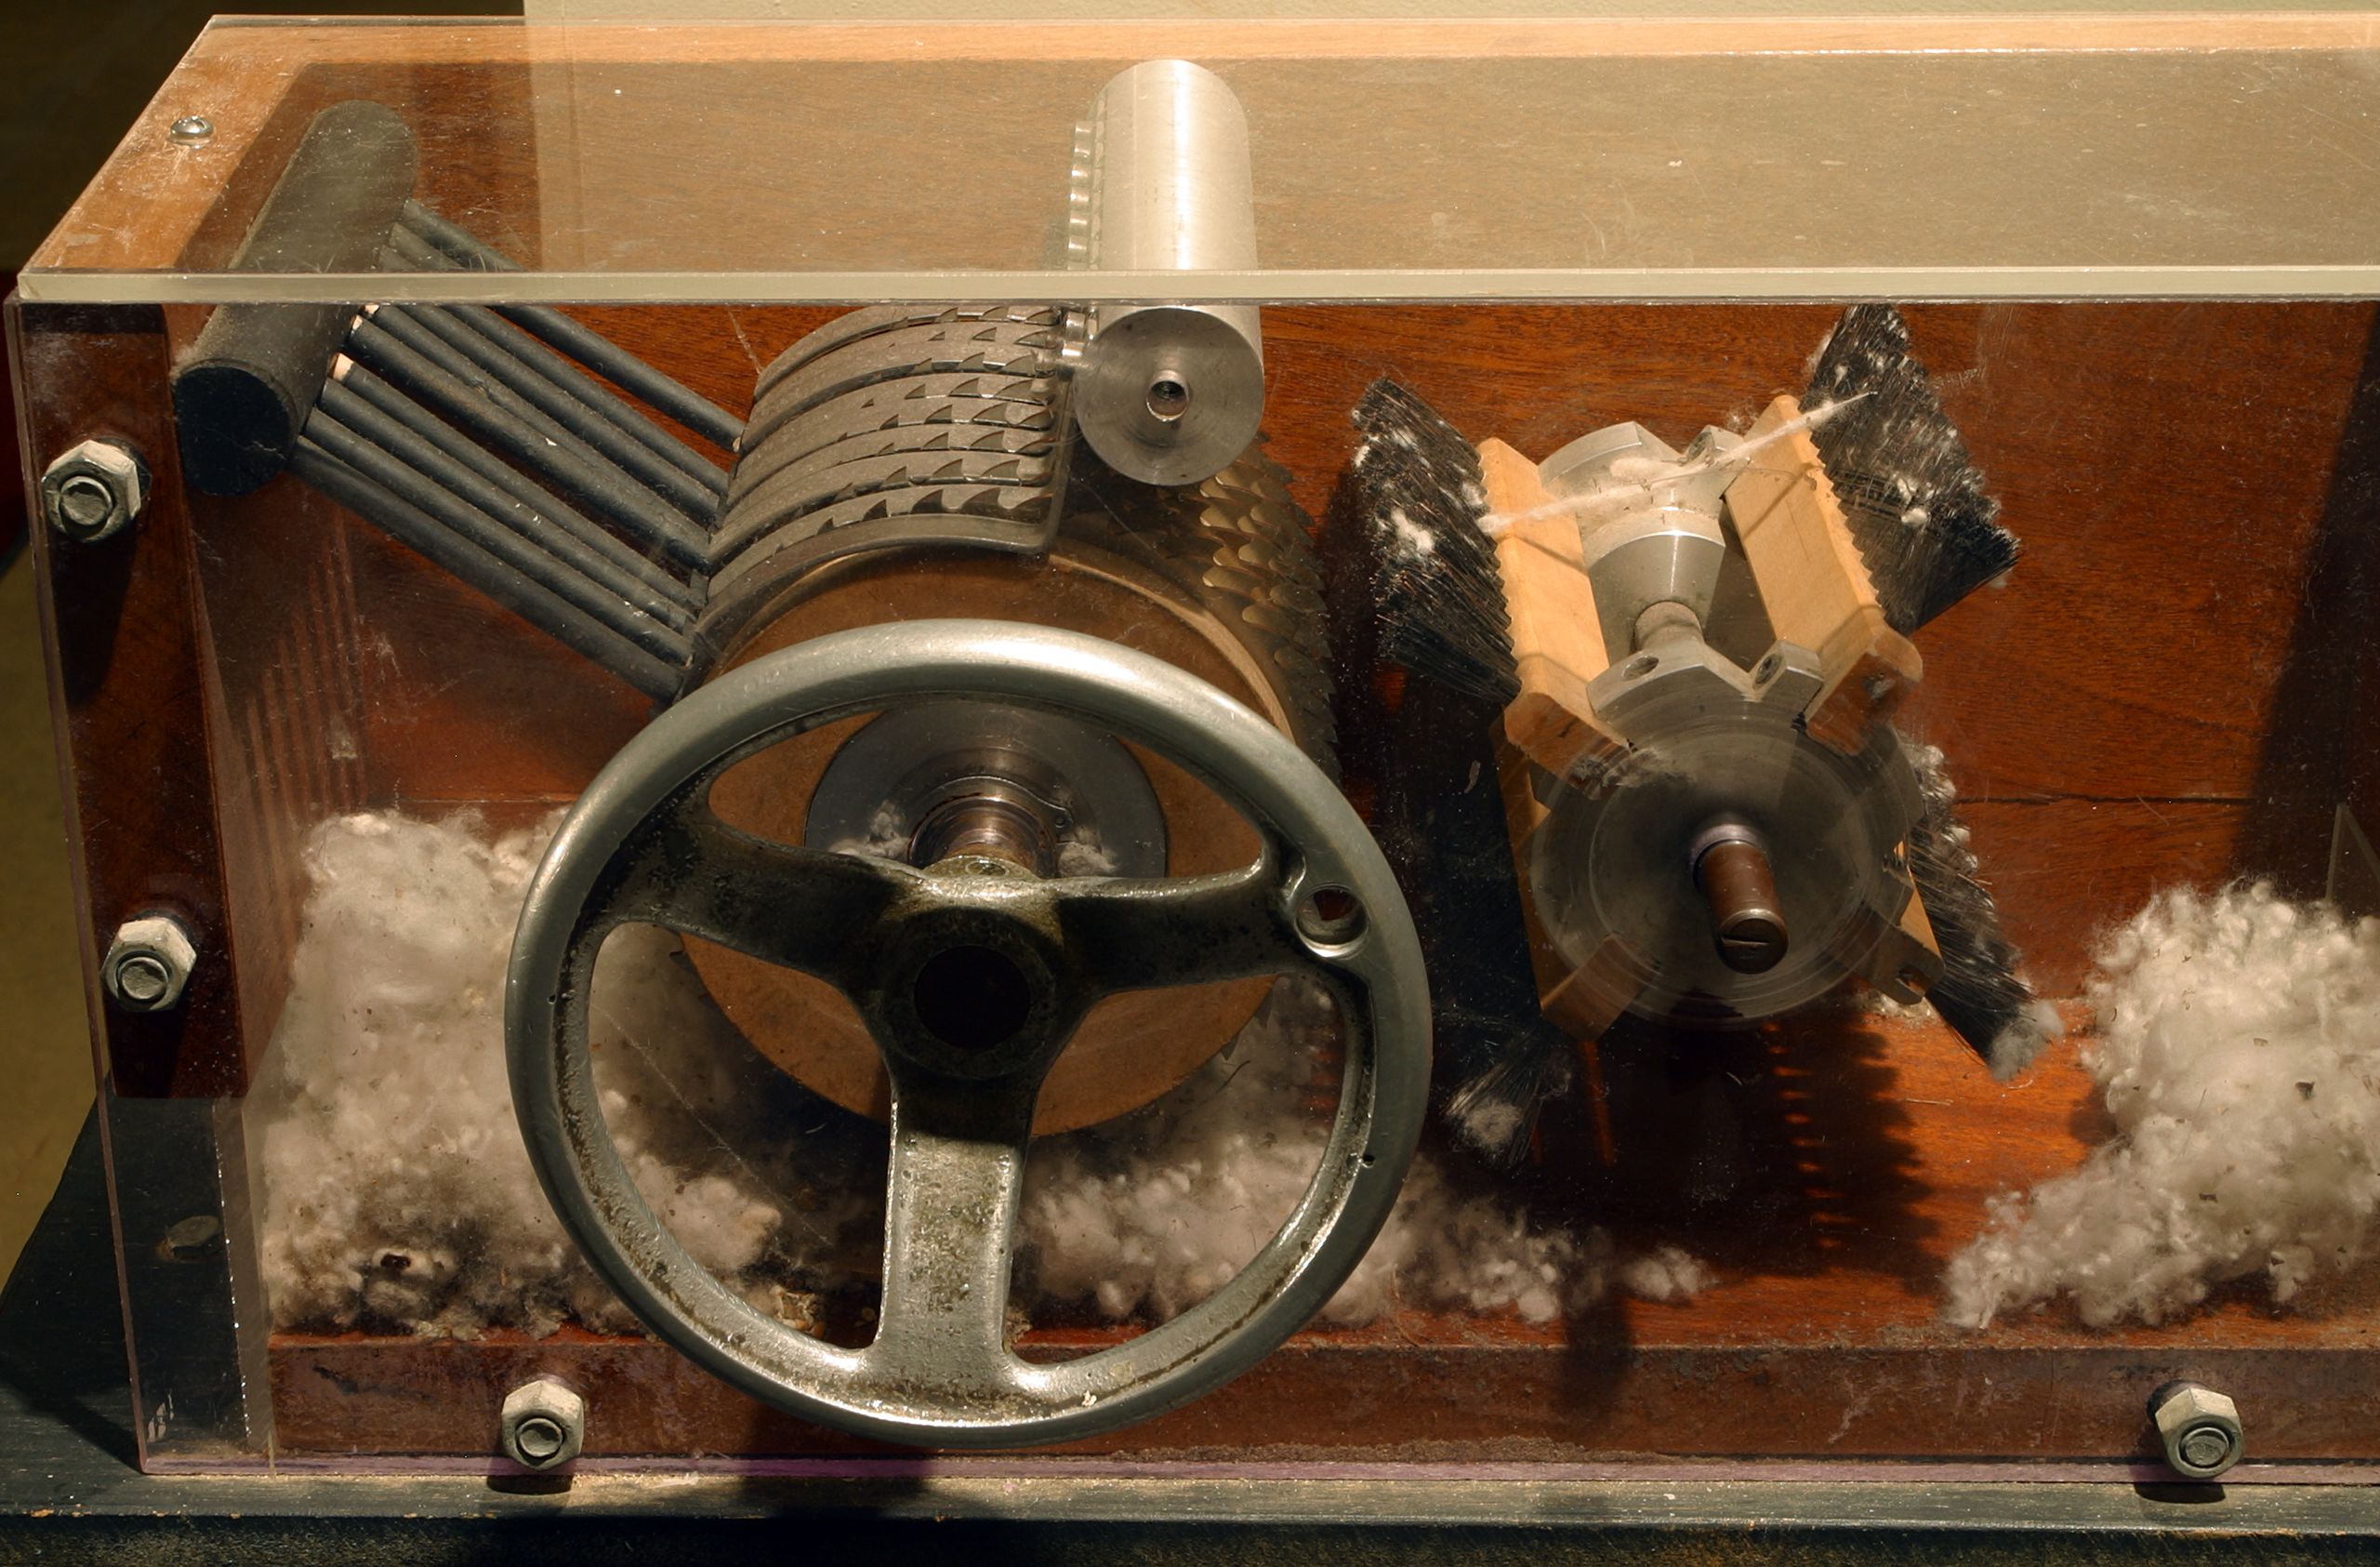 A model of a 19th-century cotton gin on display at the Eli Whitney Museum in Hamden, Connecticut